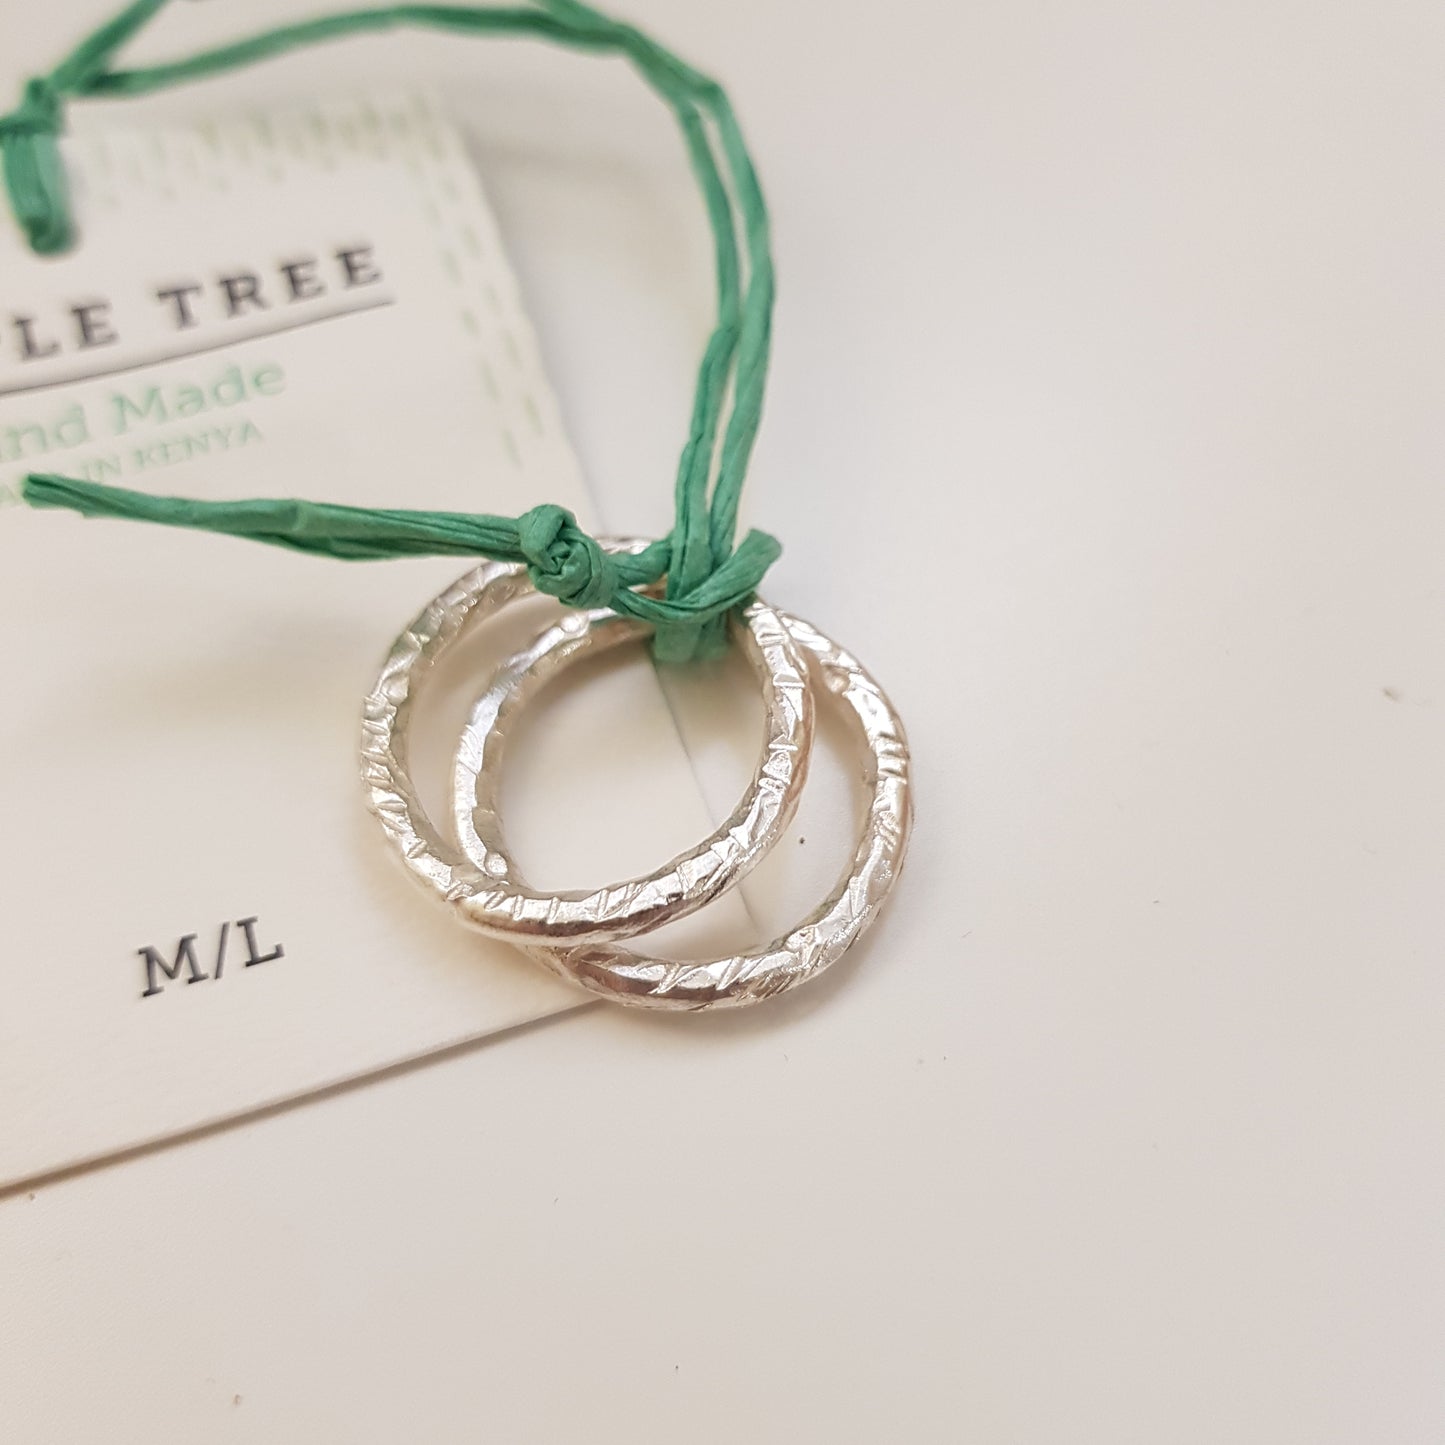 Beaten Rings (set of 2) - Silver Plated